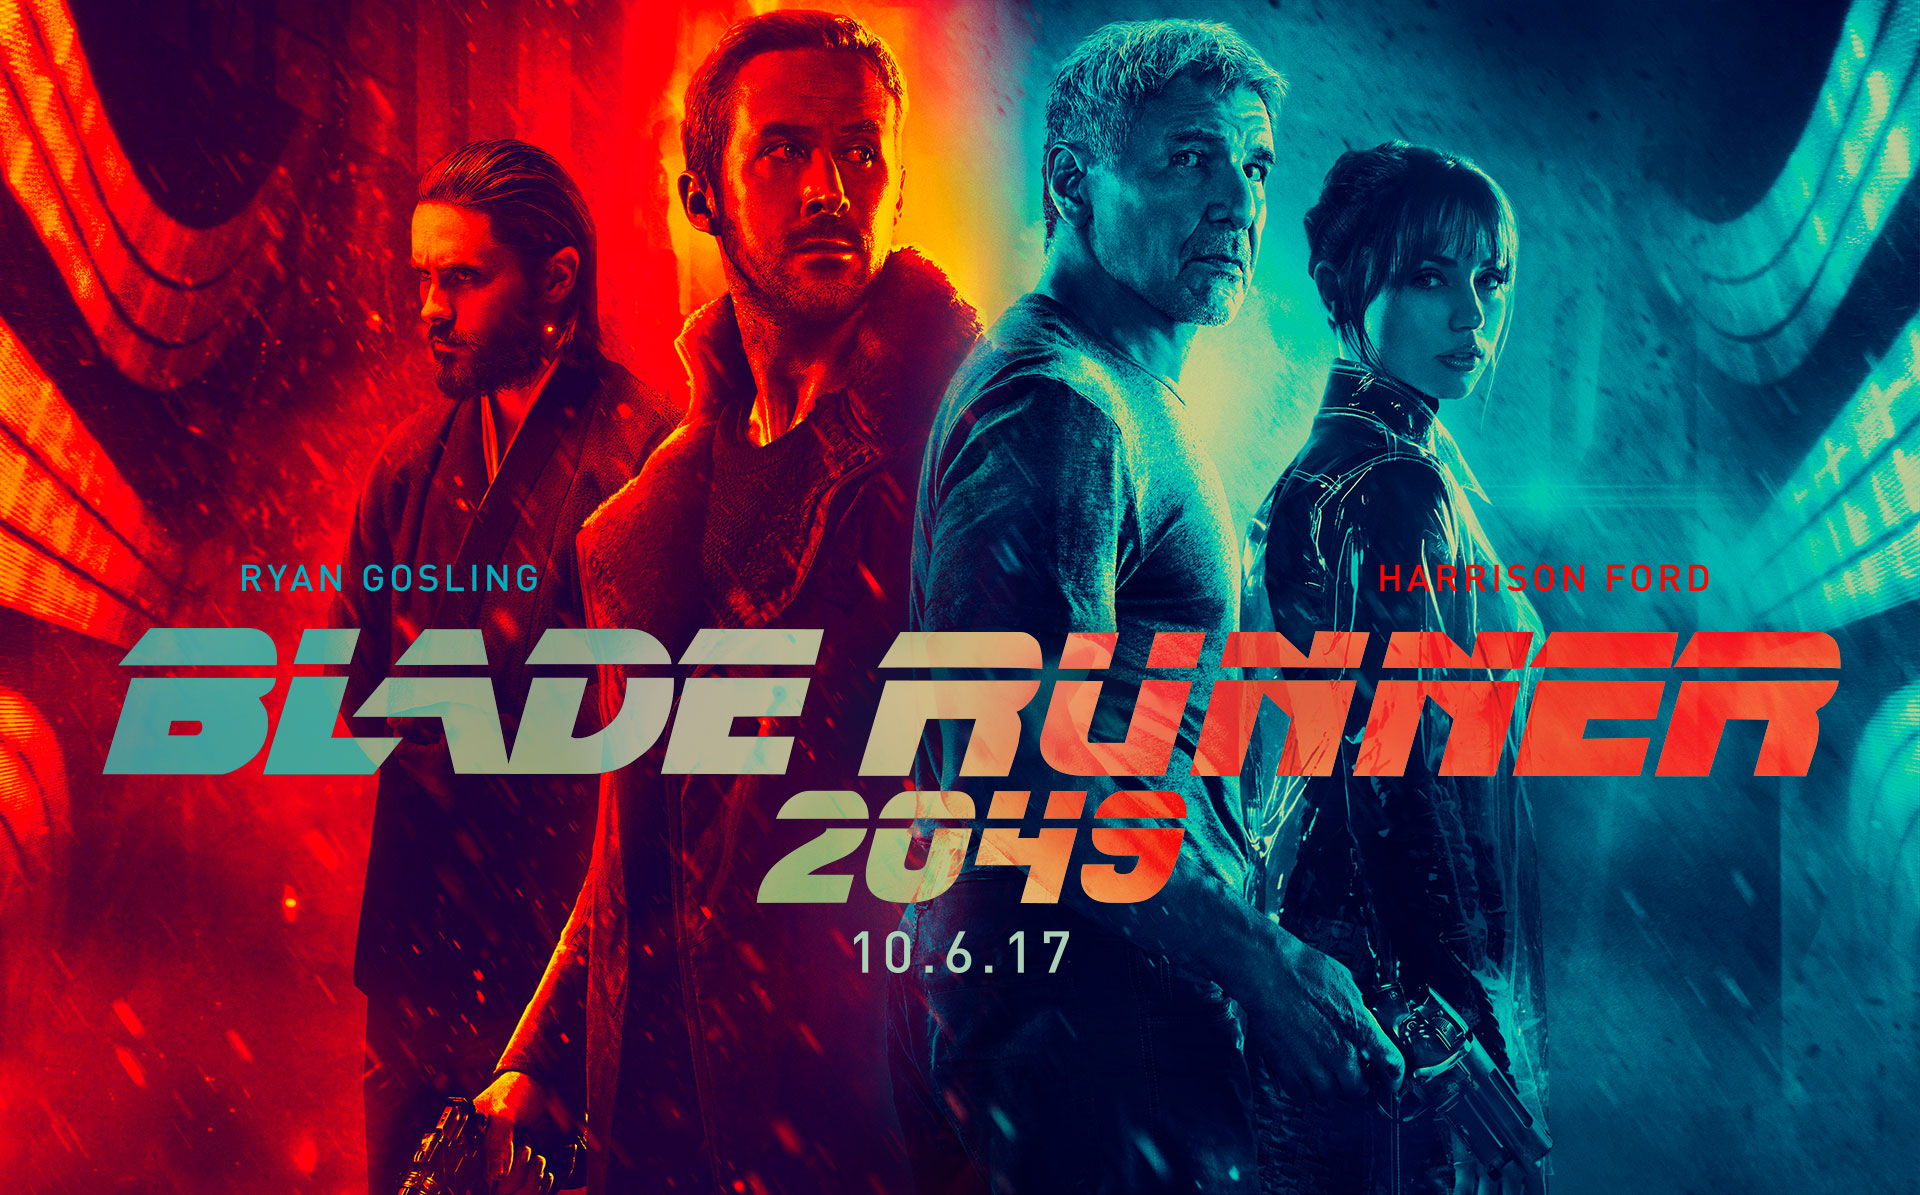 ‘Bladerunner 2049’ is a visual feast